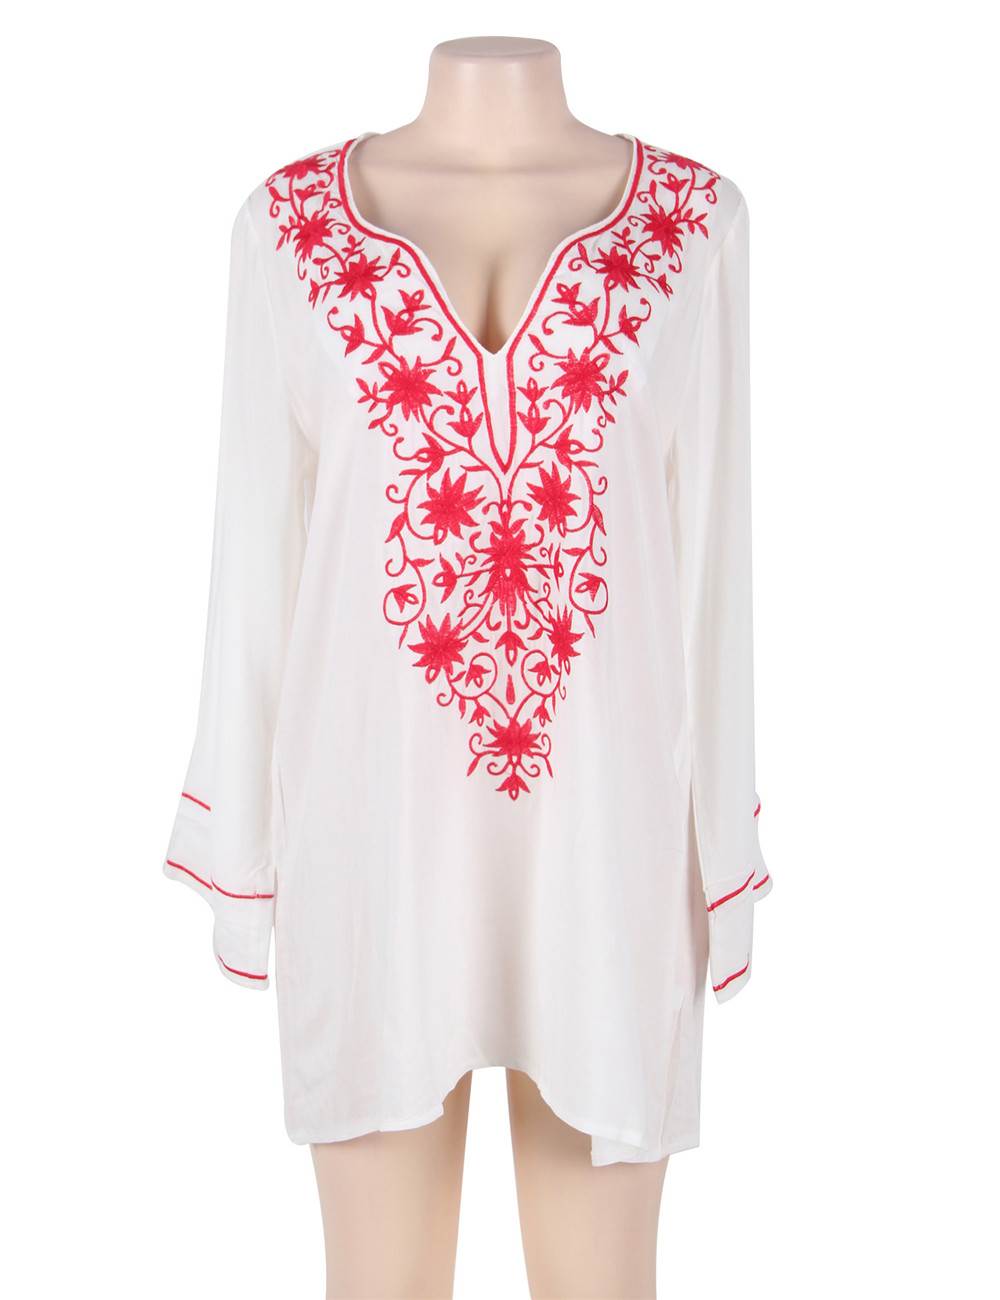 Cheap Embroidered Red Flower Long Sleeve Cover-up From China